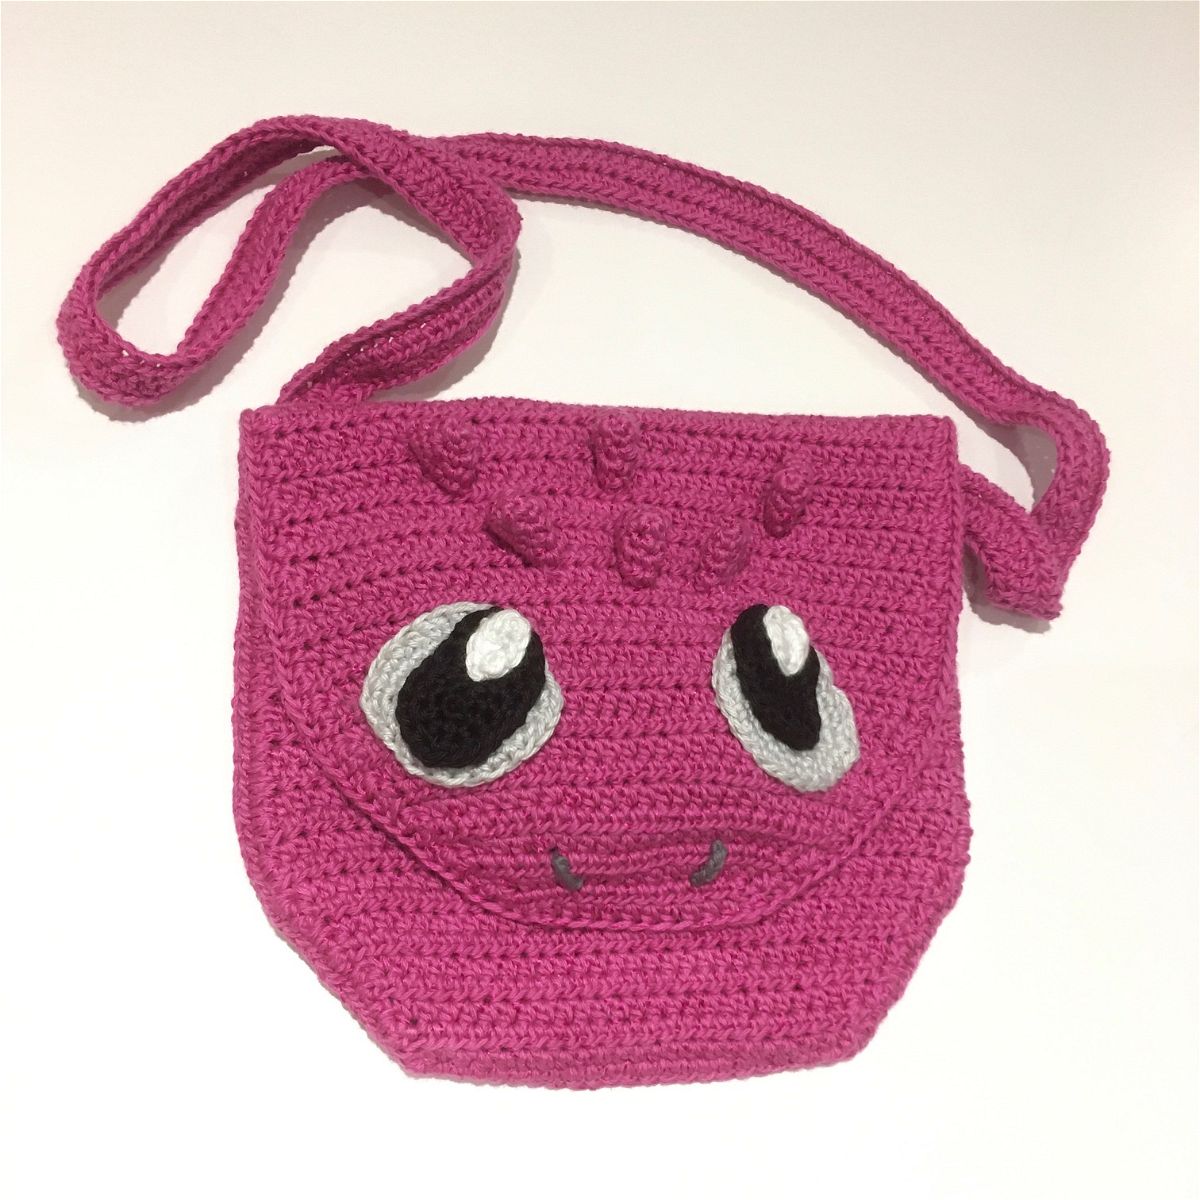 Toothless Crochet Pattern Amigurumi Bag Review by Jen for Cottontail & Whiskers